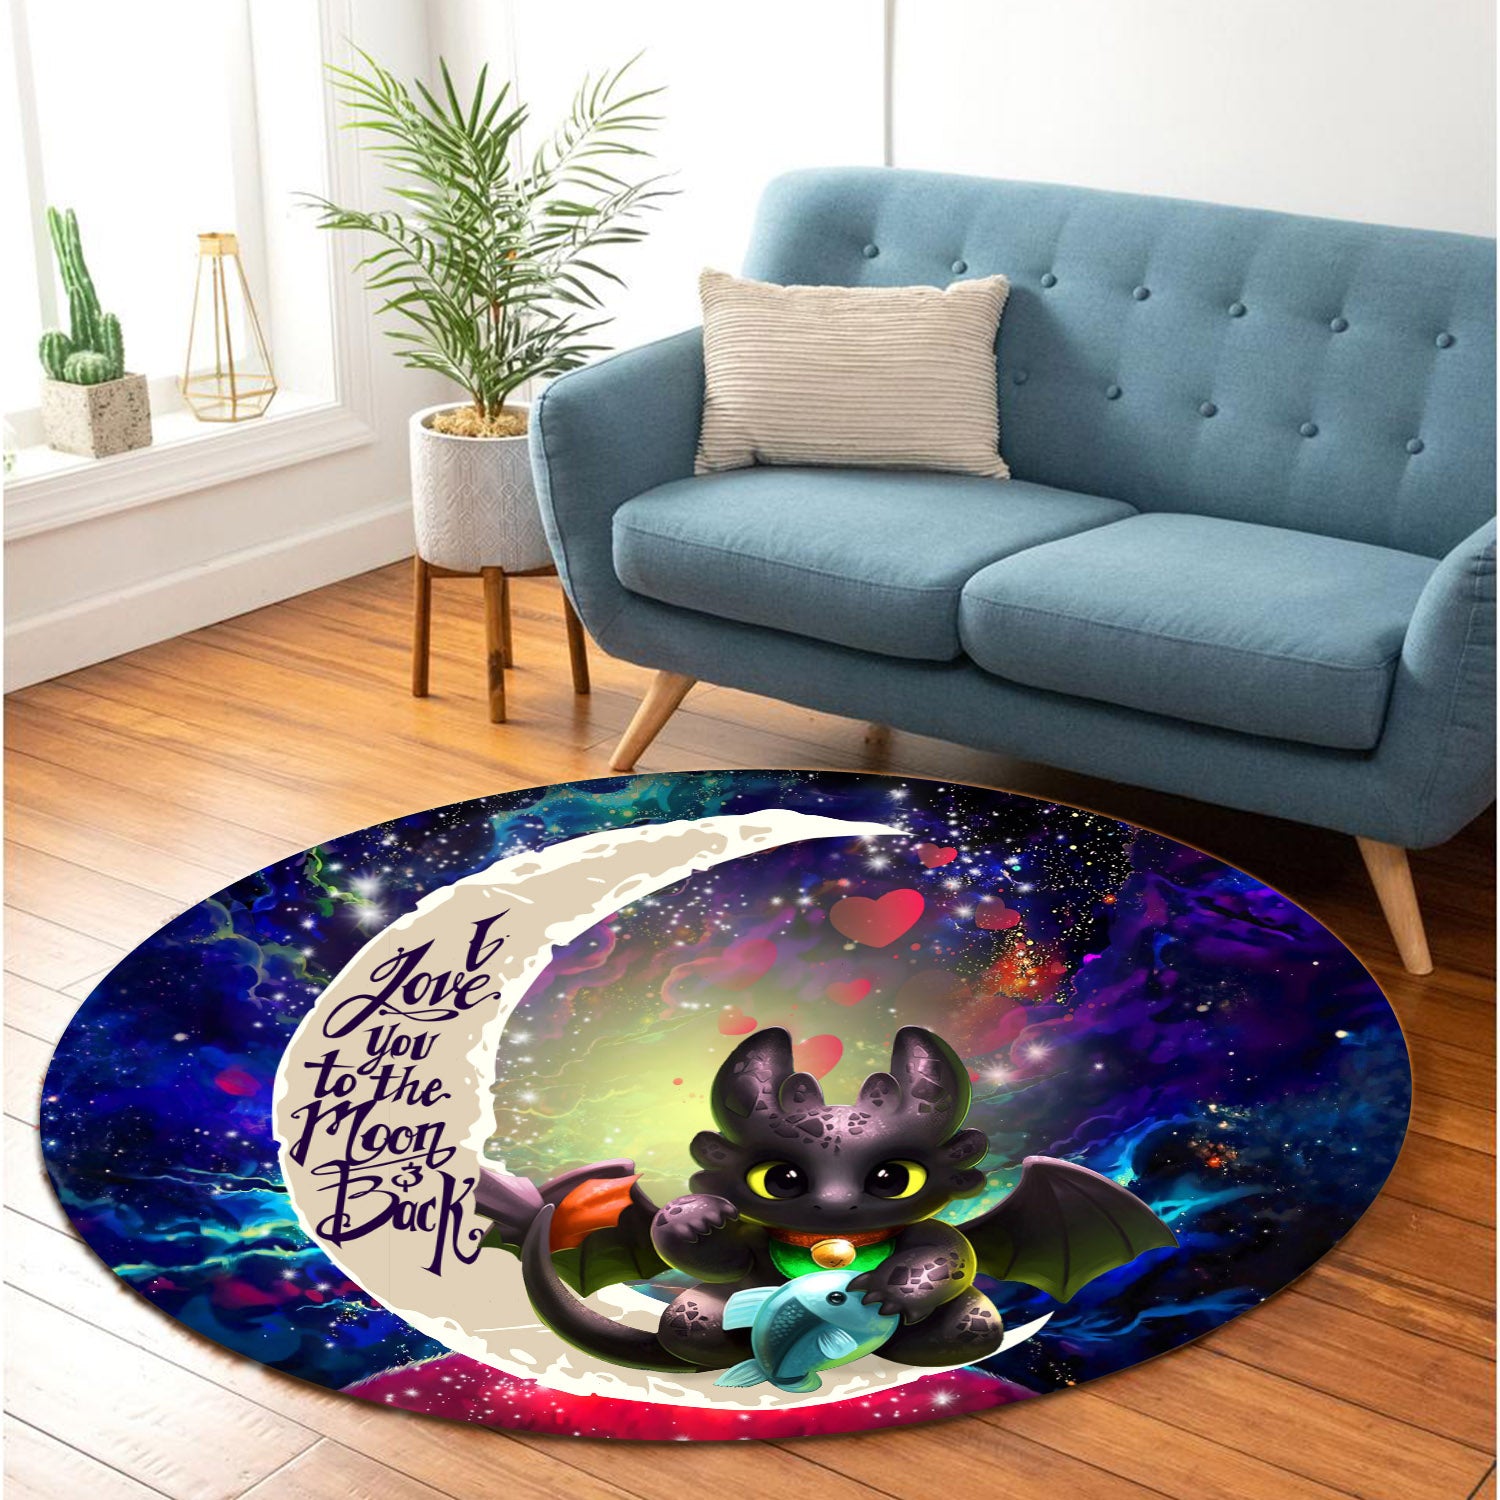 Toothless With Fish Love You To The Moon Galaxy Round Carpet Rug Bedroom Livingroom Home Decor Nearkii